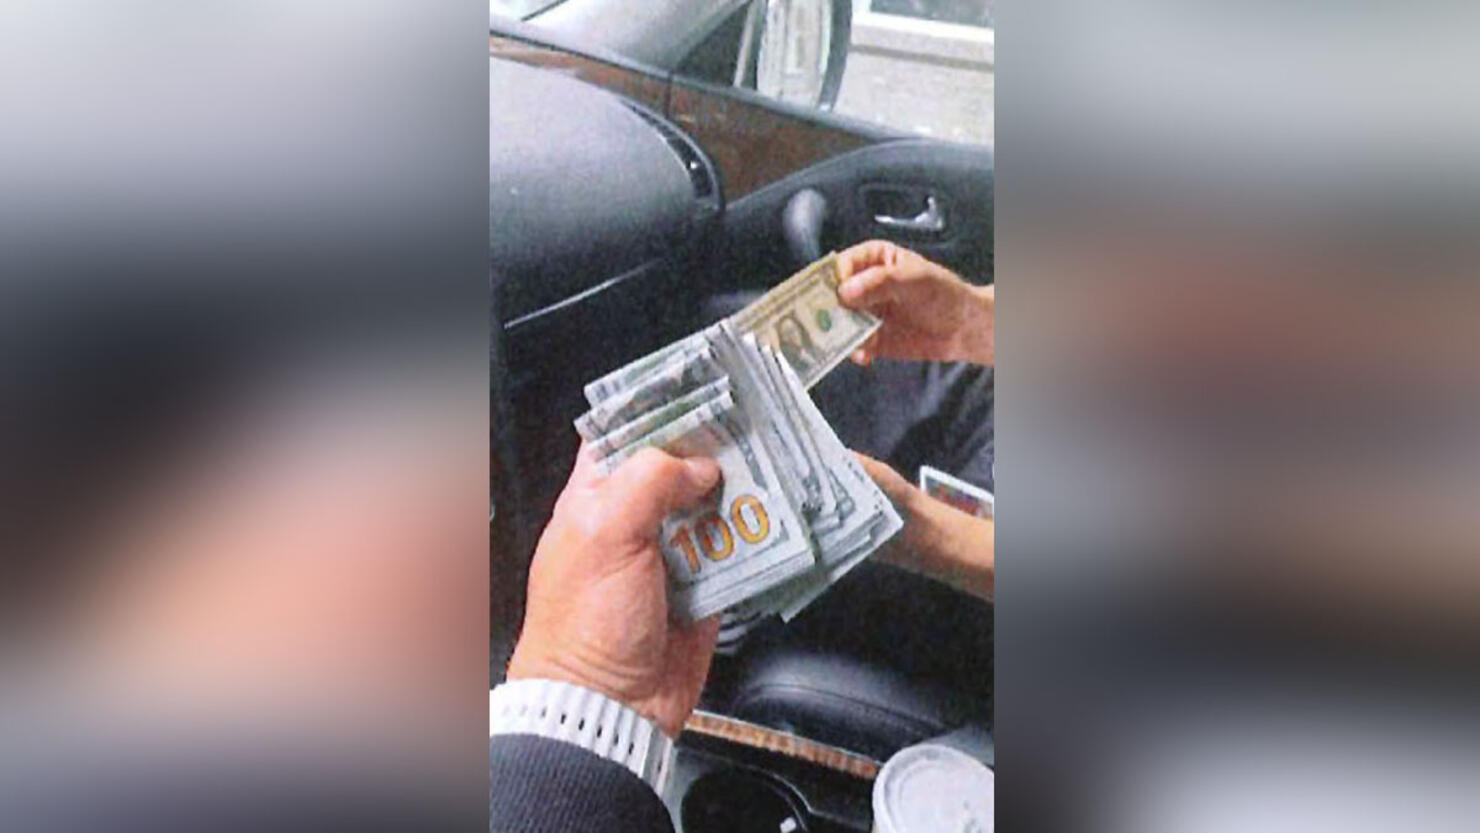 Money is exchanged hands between a suspect and an undercover agent